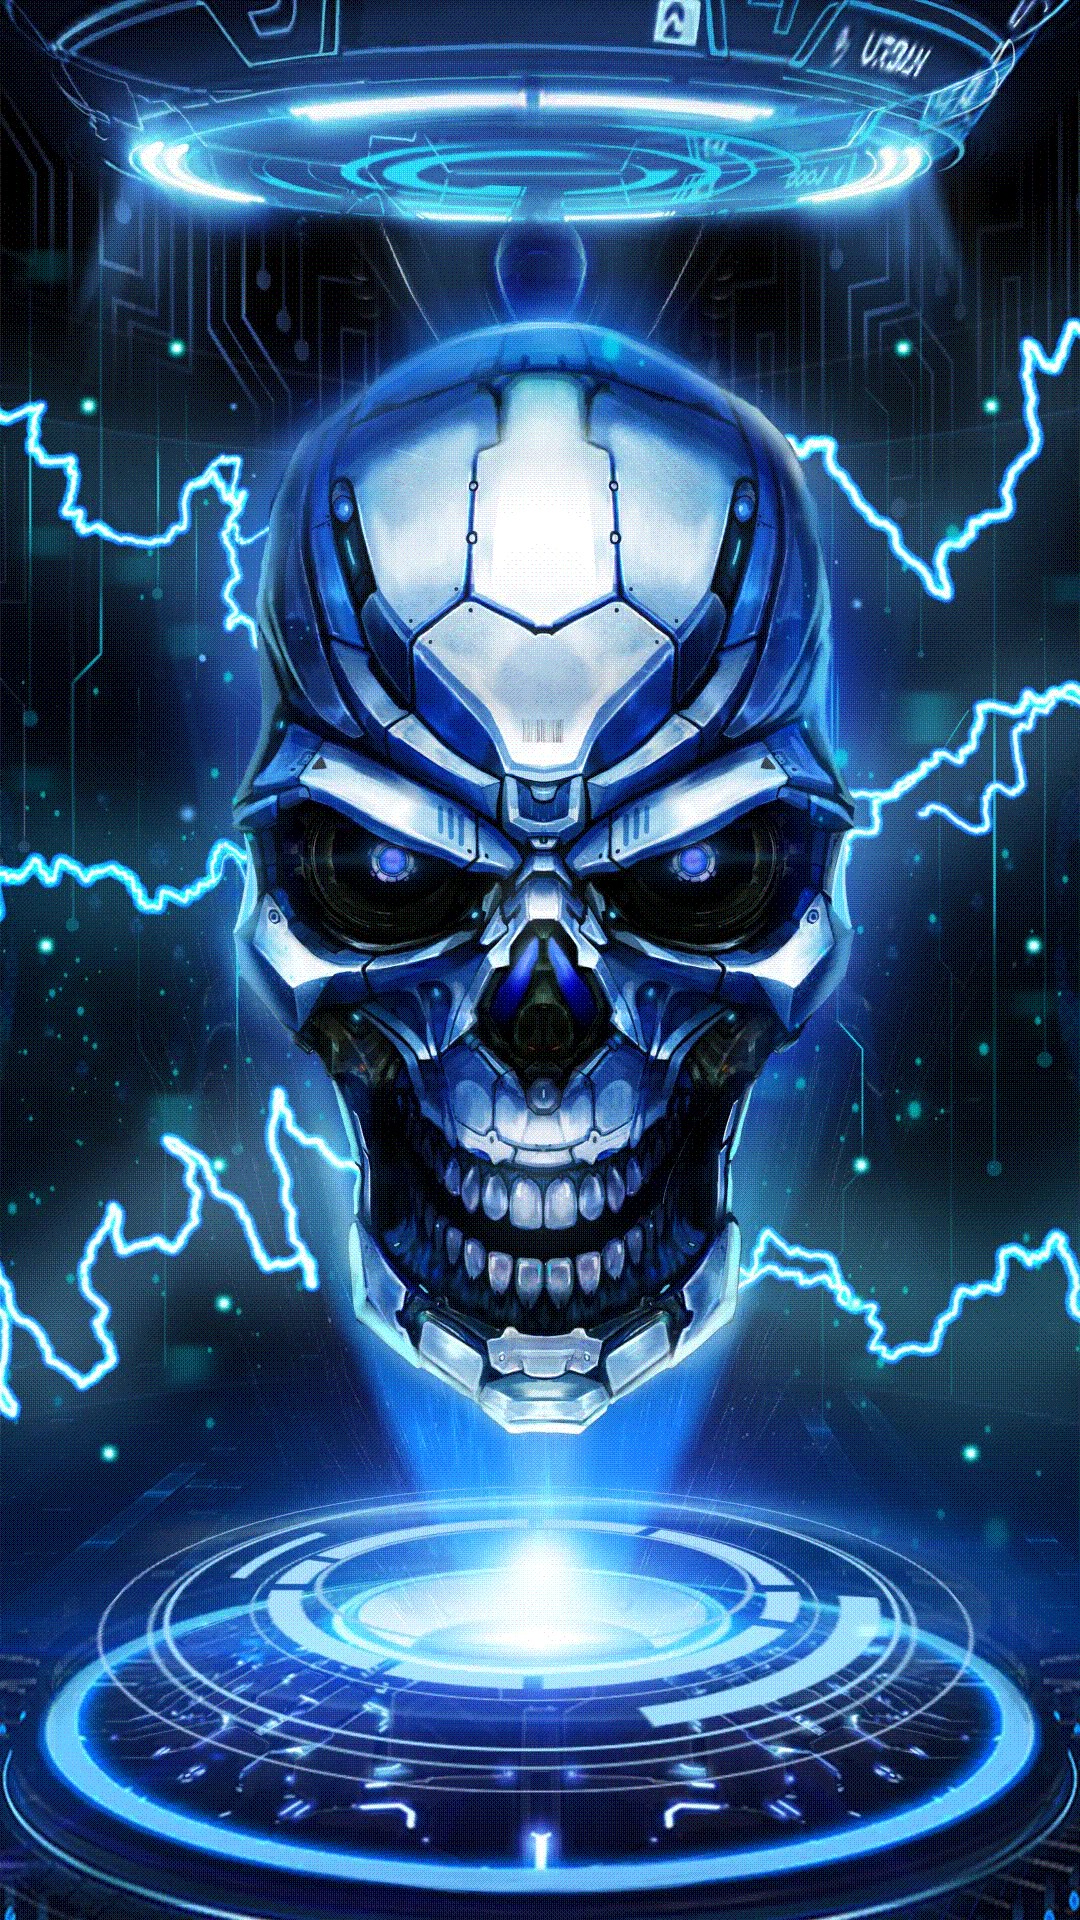 New Cool Skull Live Wallpaper Android Wallpapers From - Blue Fire Skull